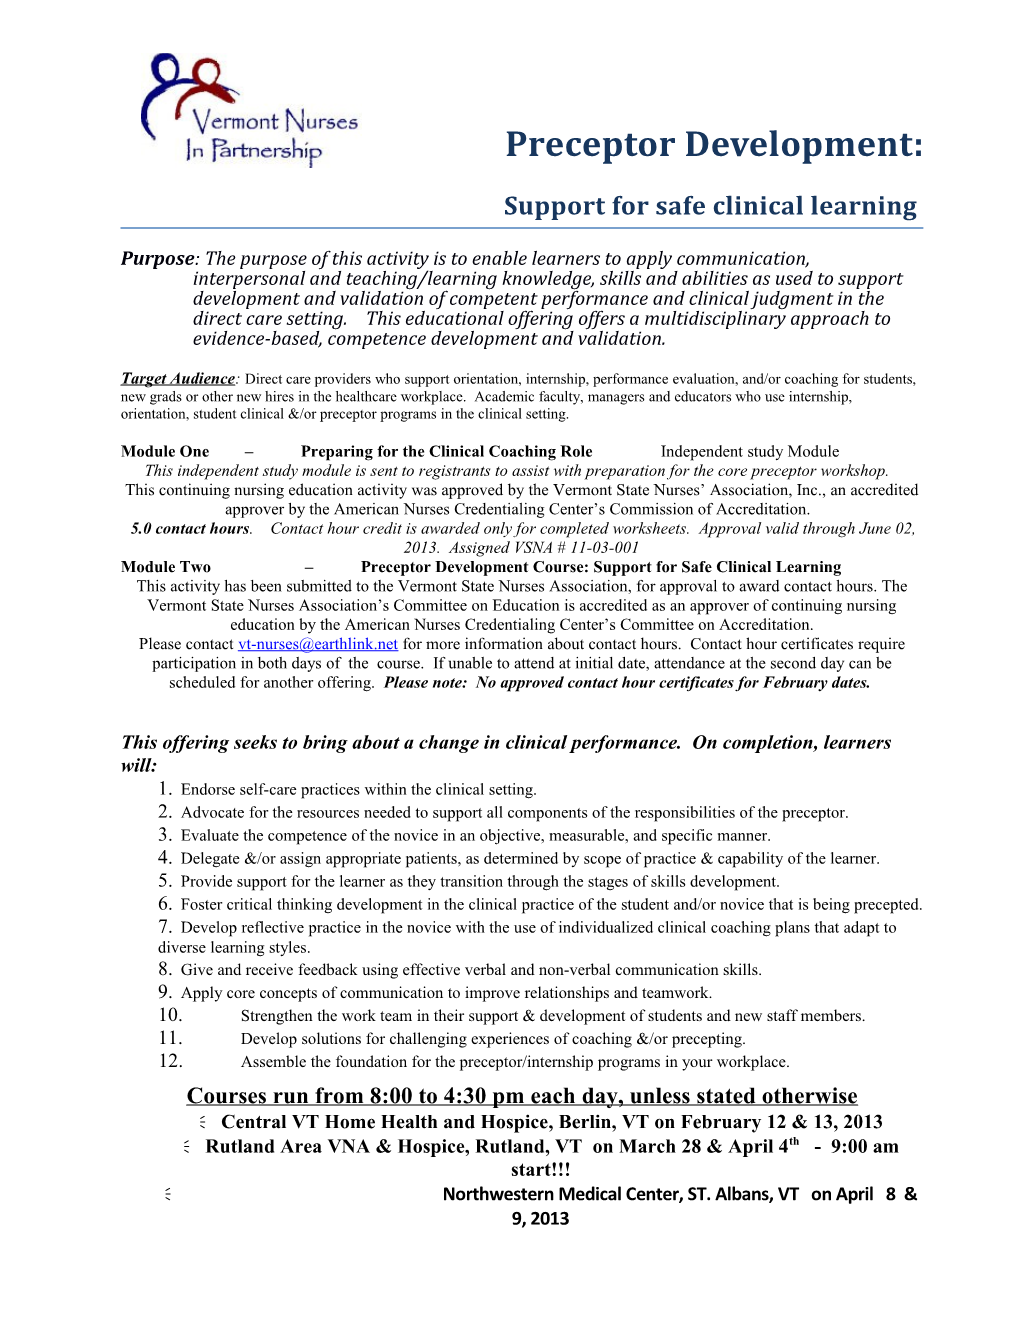 Support for Safe Clinical Learning